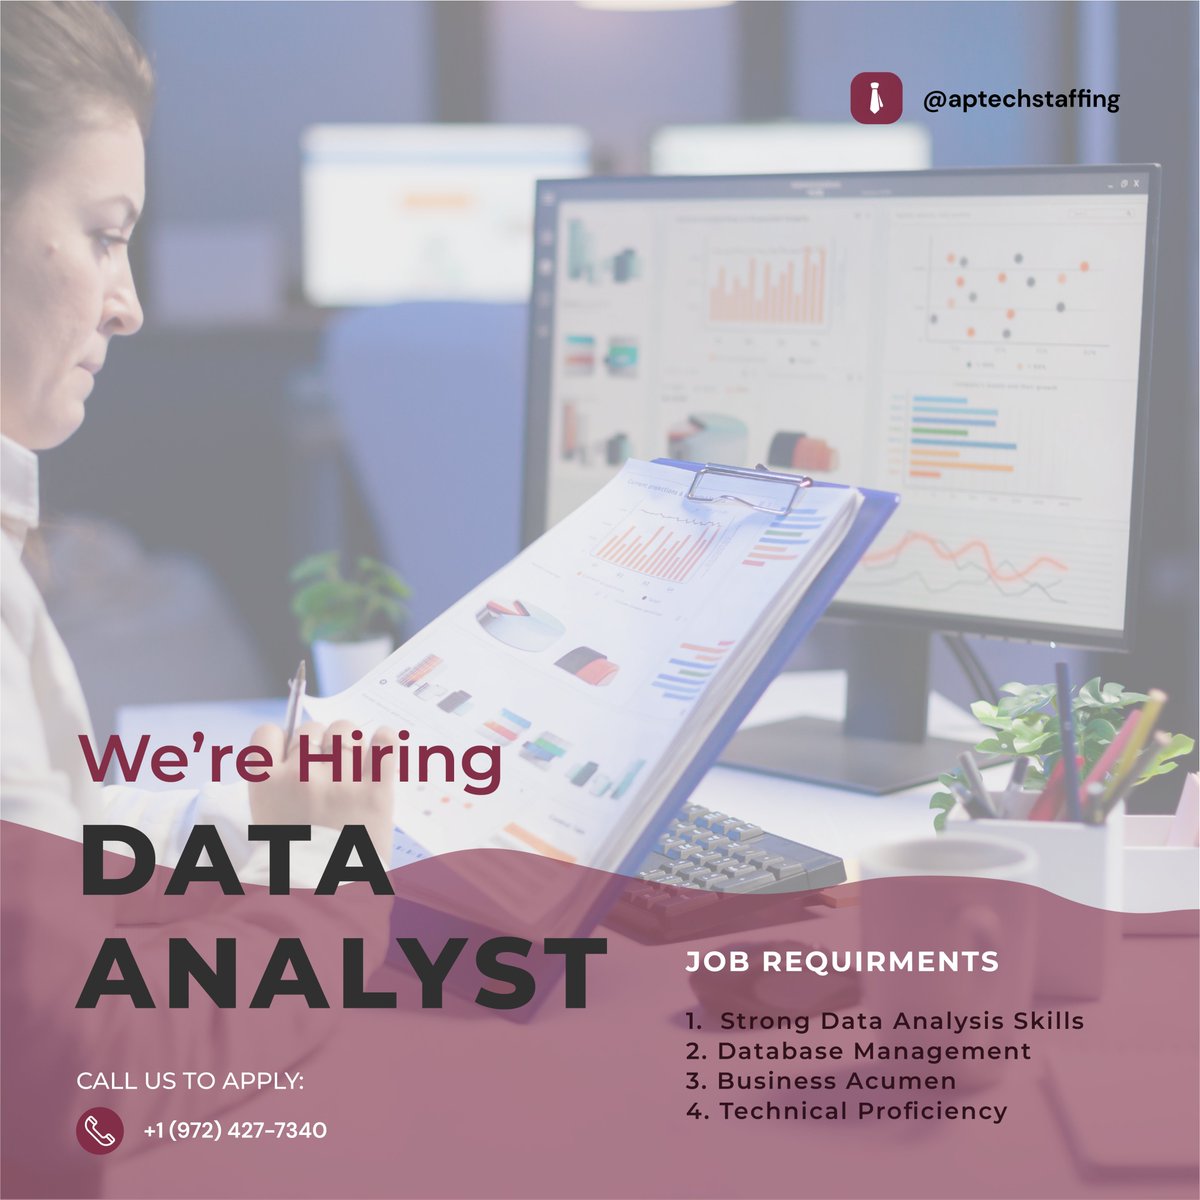 📢 HIRING: Data Analyst

Share your resume with us at:
career@aptechstaffing.com

.

.

#dataanalyst #datajobs #newopportunity #fulltimework #dataanalysis #dataanalytics #remotework #fulltimedataanalyst #nowhiring #workfromhome #remotejobs #datadriven #jobopportunity